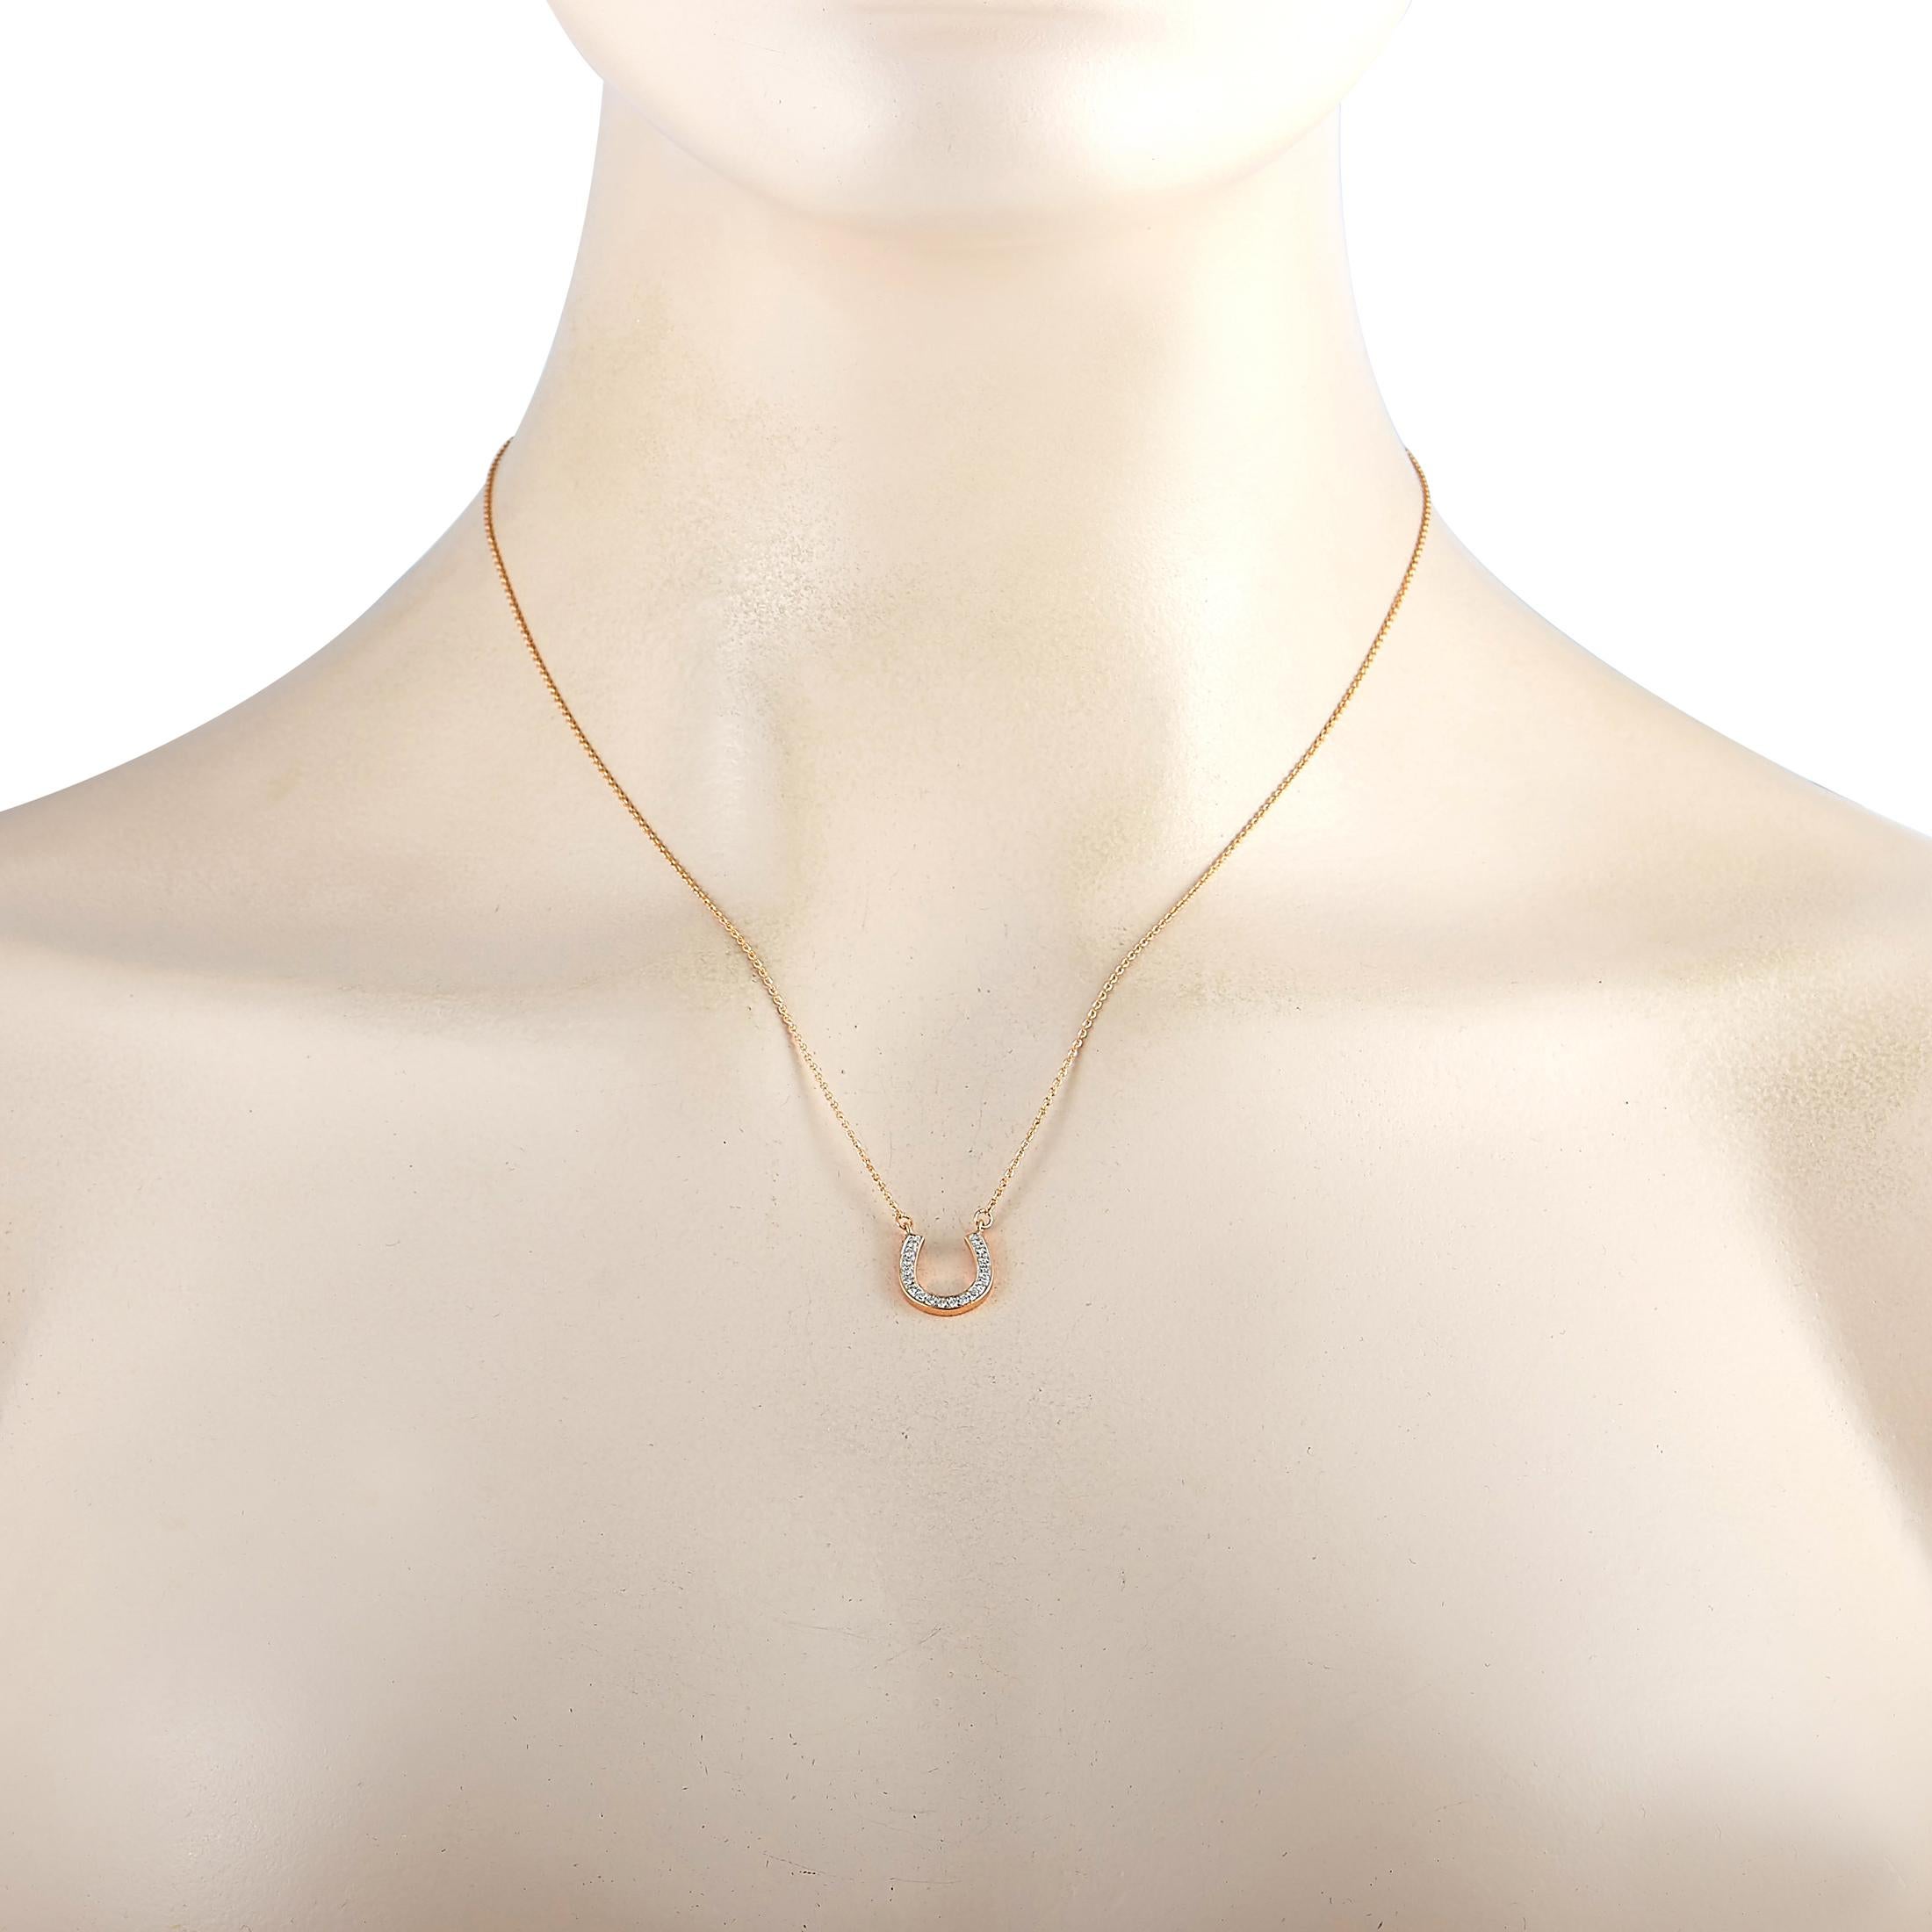 This LB Exclusive necklace is made of 14K rose gold and embellished with diamonds that amount to 0.19 carats. The necklace weighs 2.4 grams and is presented with a 17” chain and a horseshoe pendant that measures 0.50” in length and 0.47” in